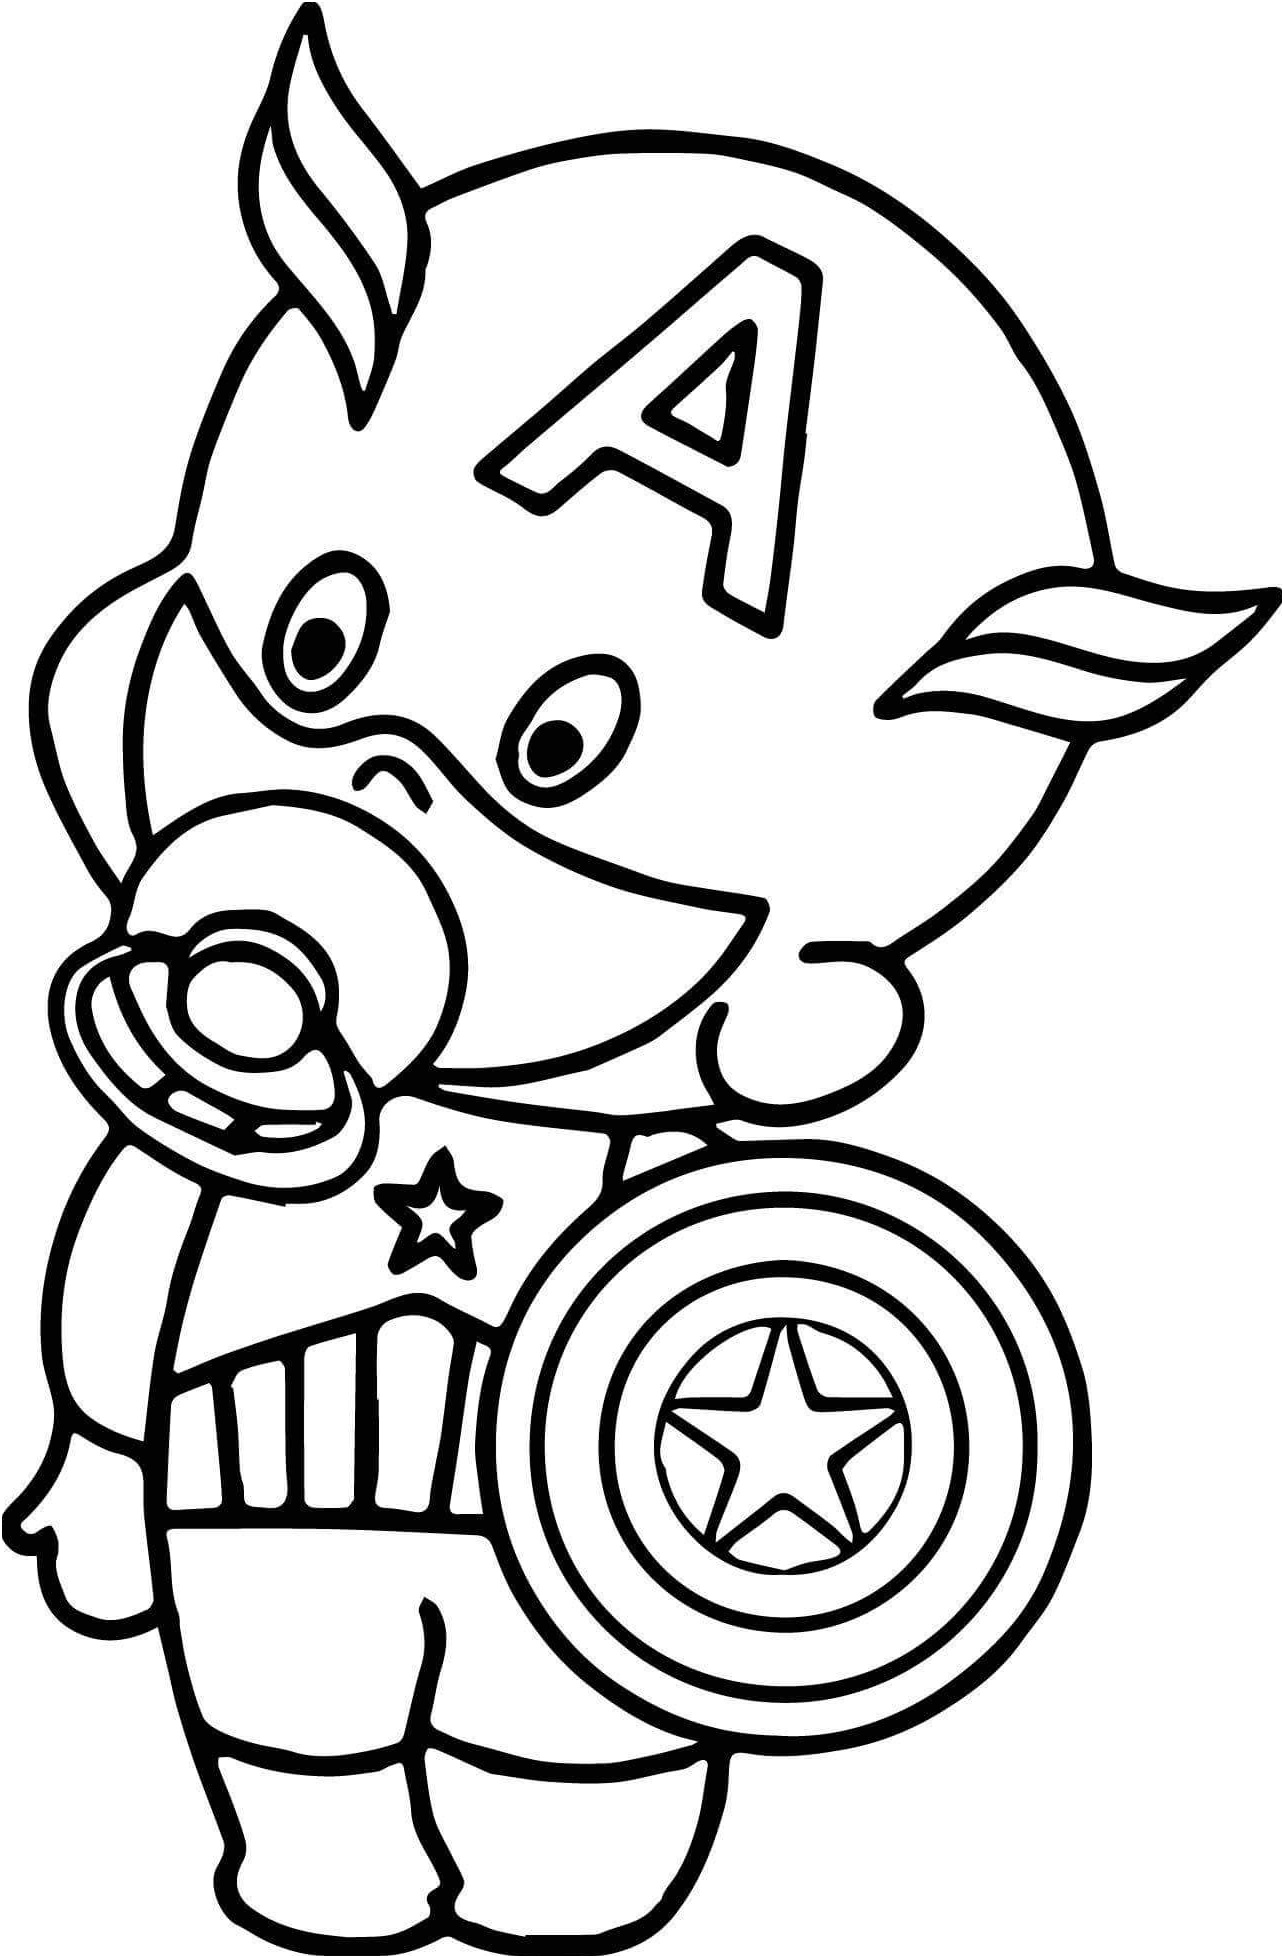 captain america cartoon coloring pages